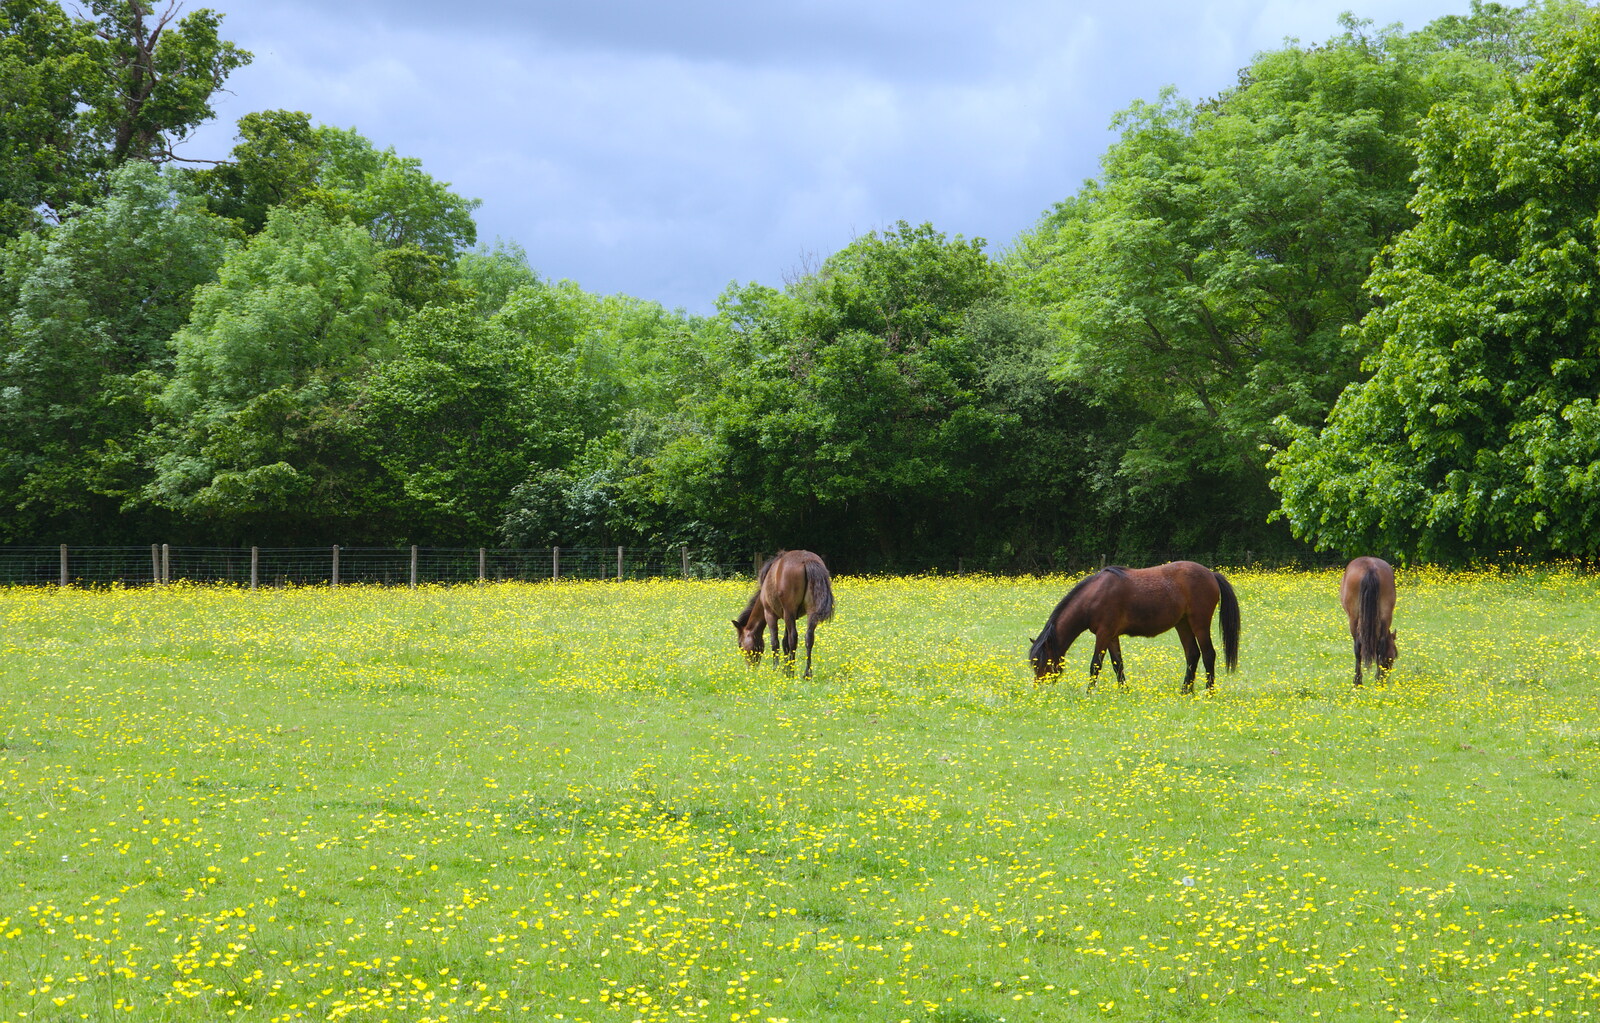 Chagford Lido and a Trip to Parke, Bovey Tracey, Devon - 25th May 2019: More horses in a field of buttercups